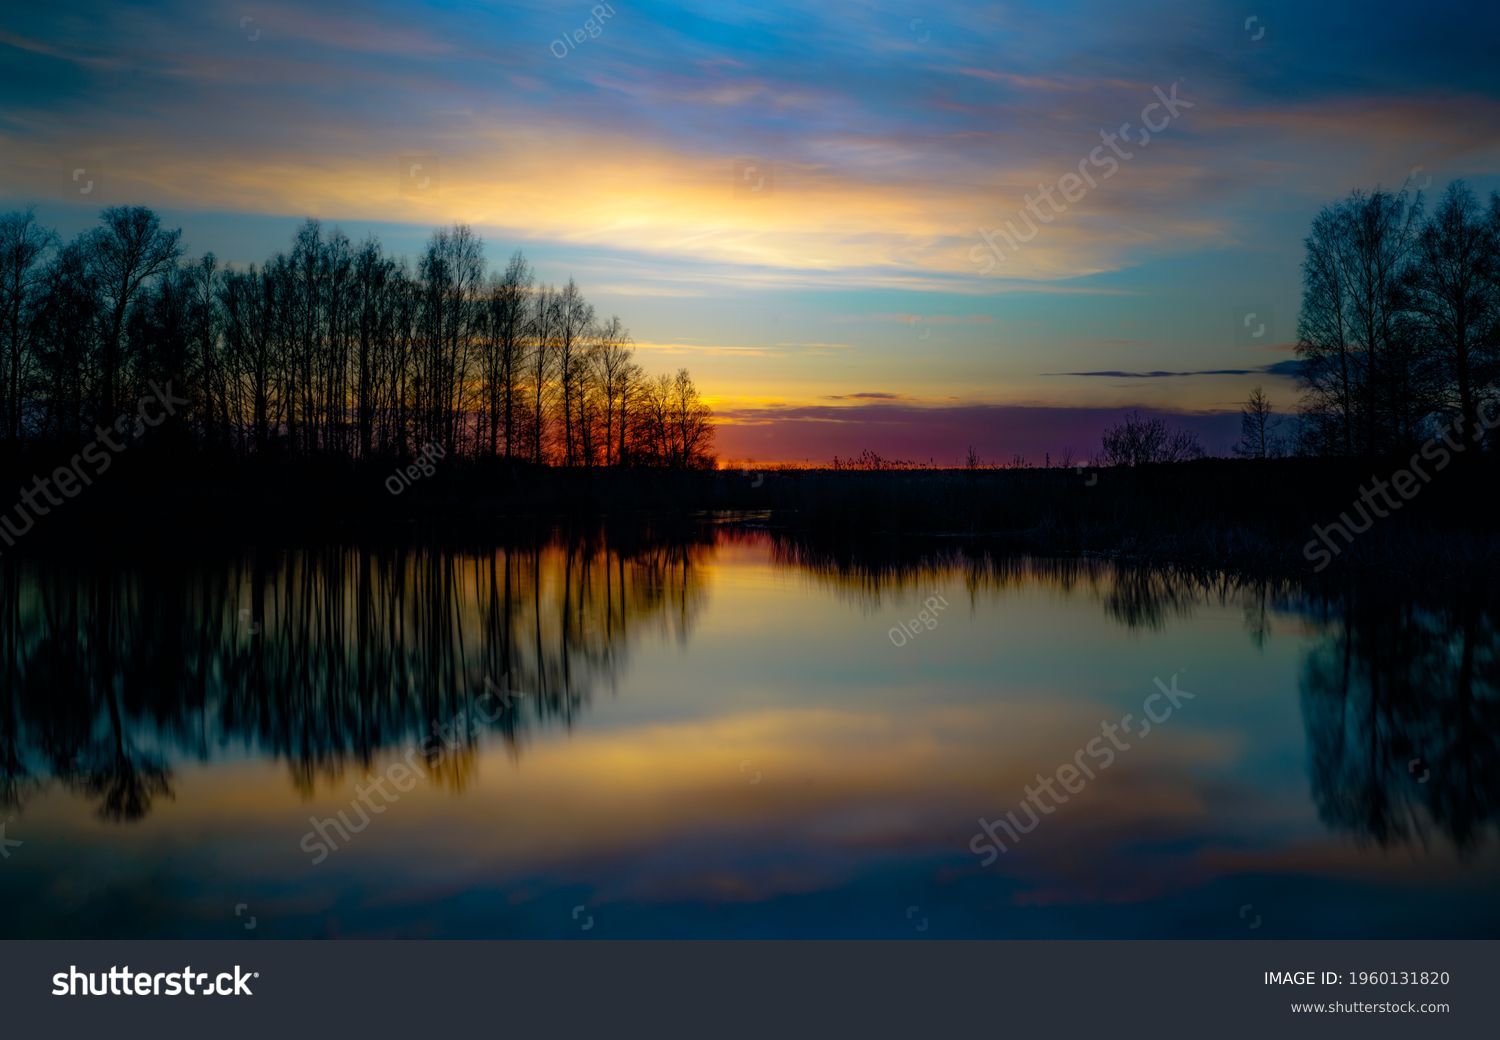 sunset at coast of the lake. Nature landscape. Nature in northern Europe. reflection, blue sky and yellow sunlight. landscape during sunset. #1960131820